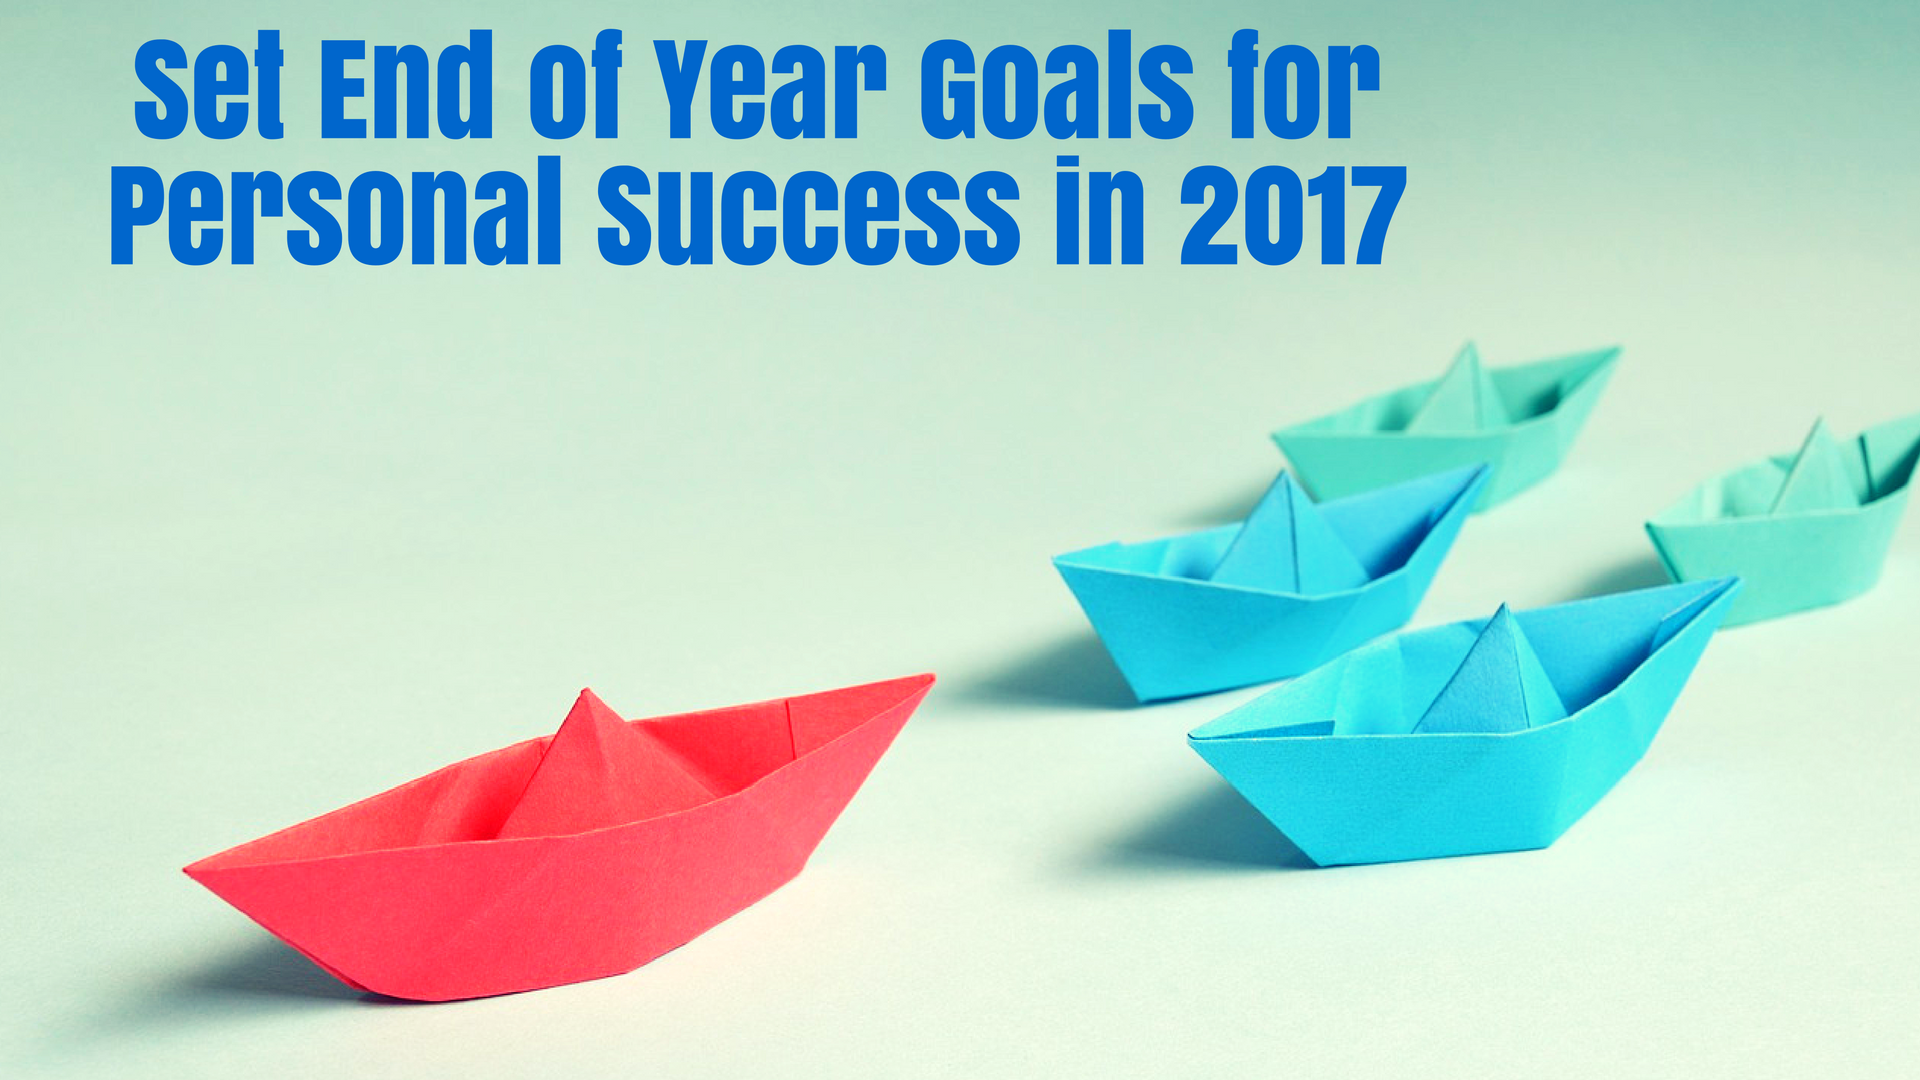 Set End of Year Goals for Personal Success in 2017